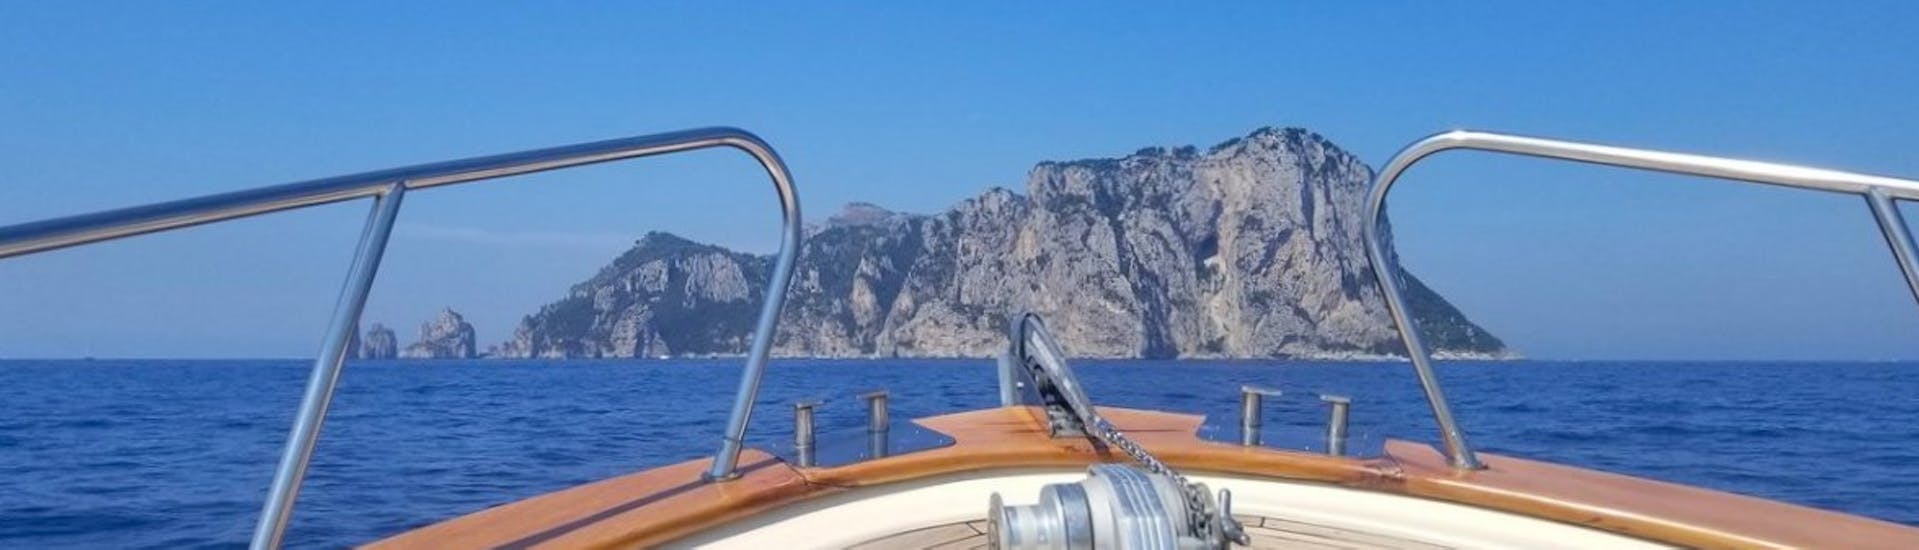 Private Boat Trip to Capri and its Caves with Swimming Stop.